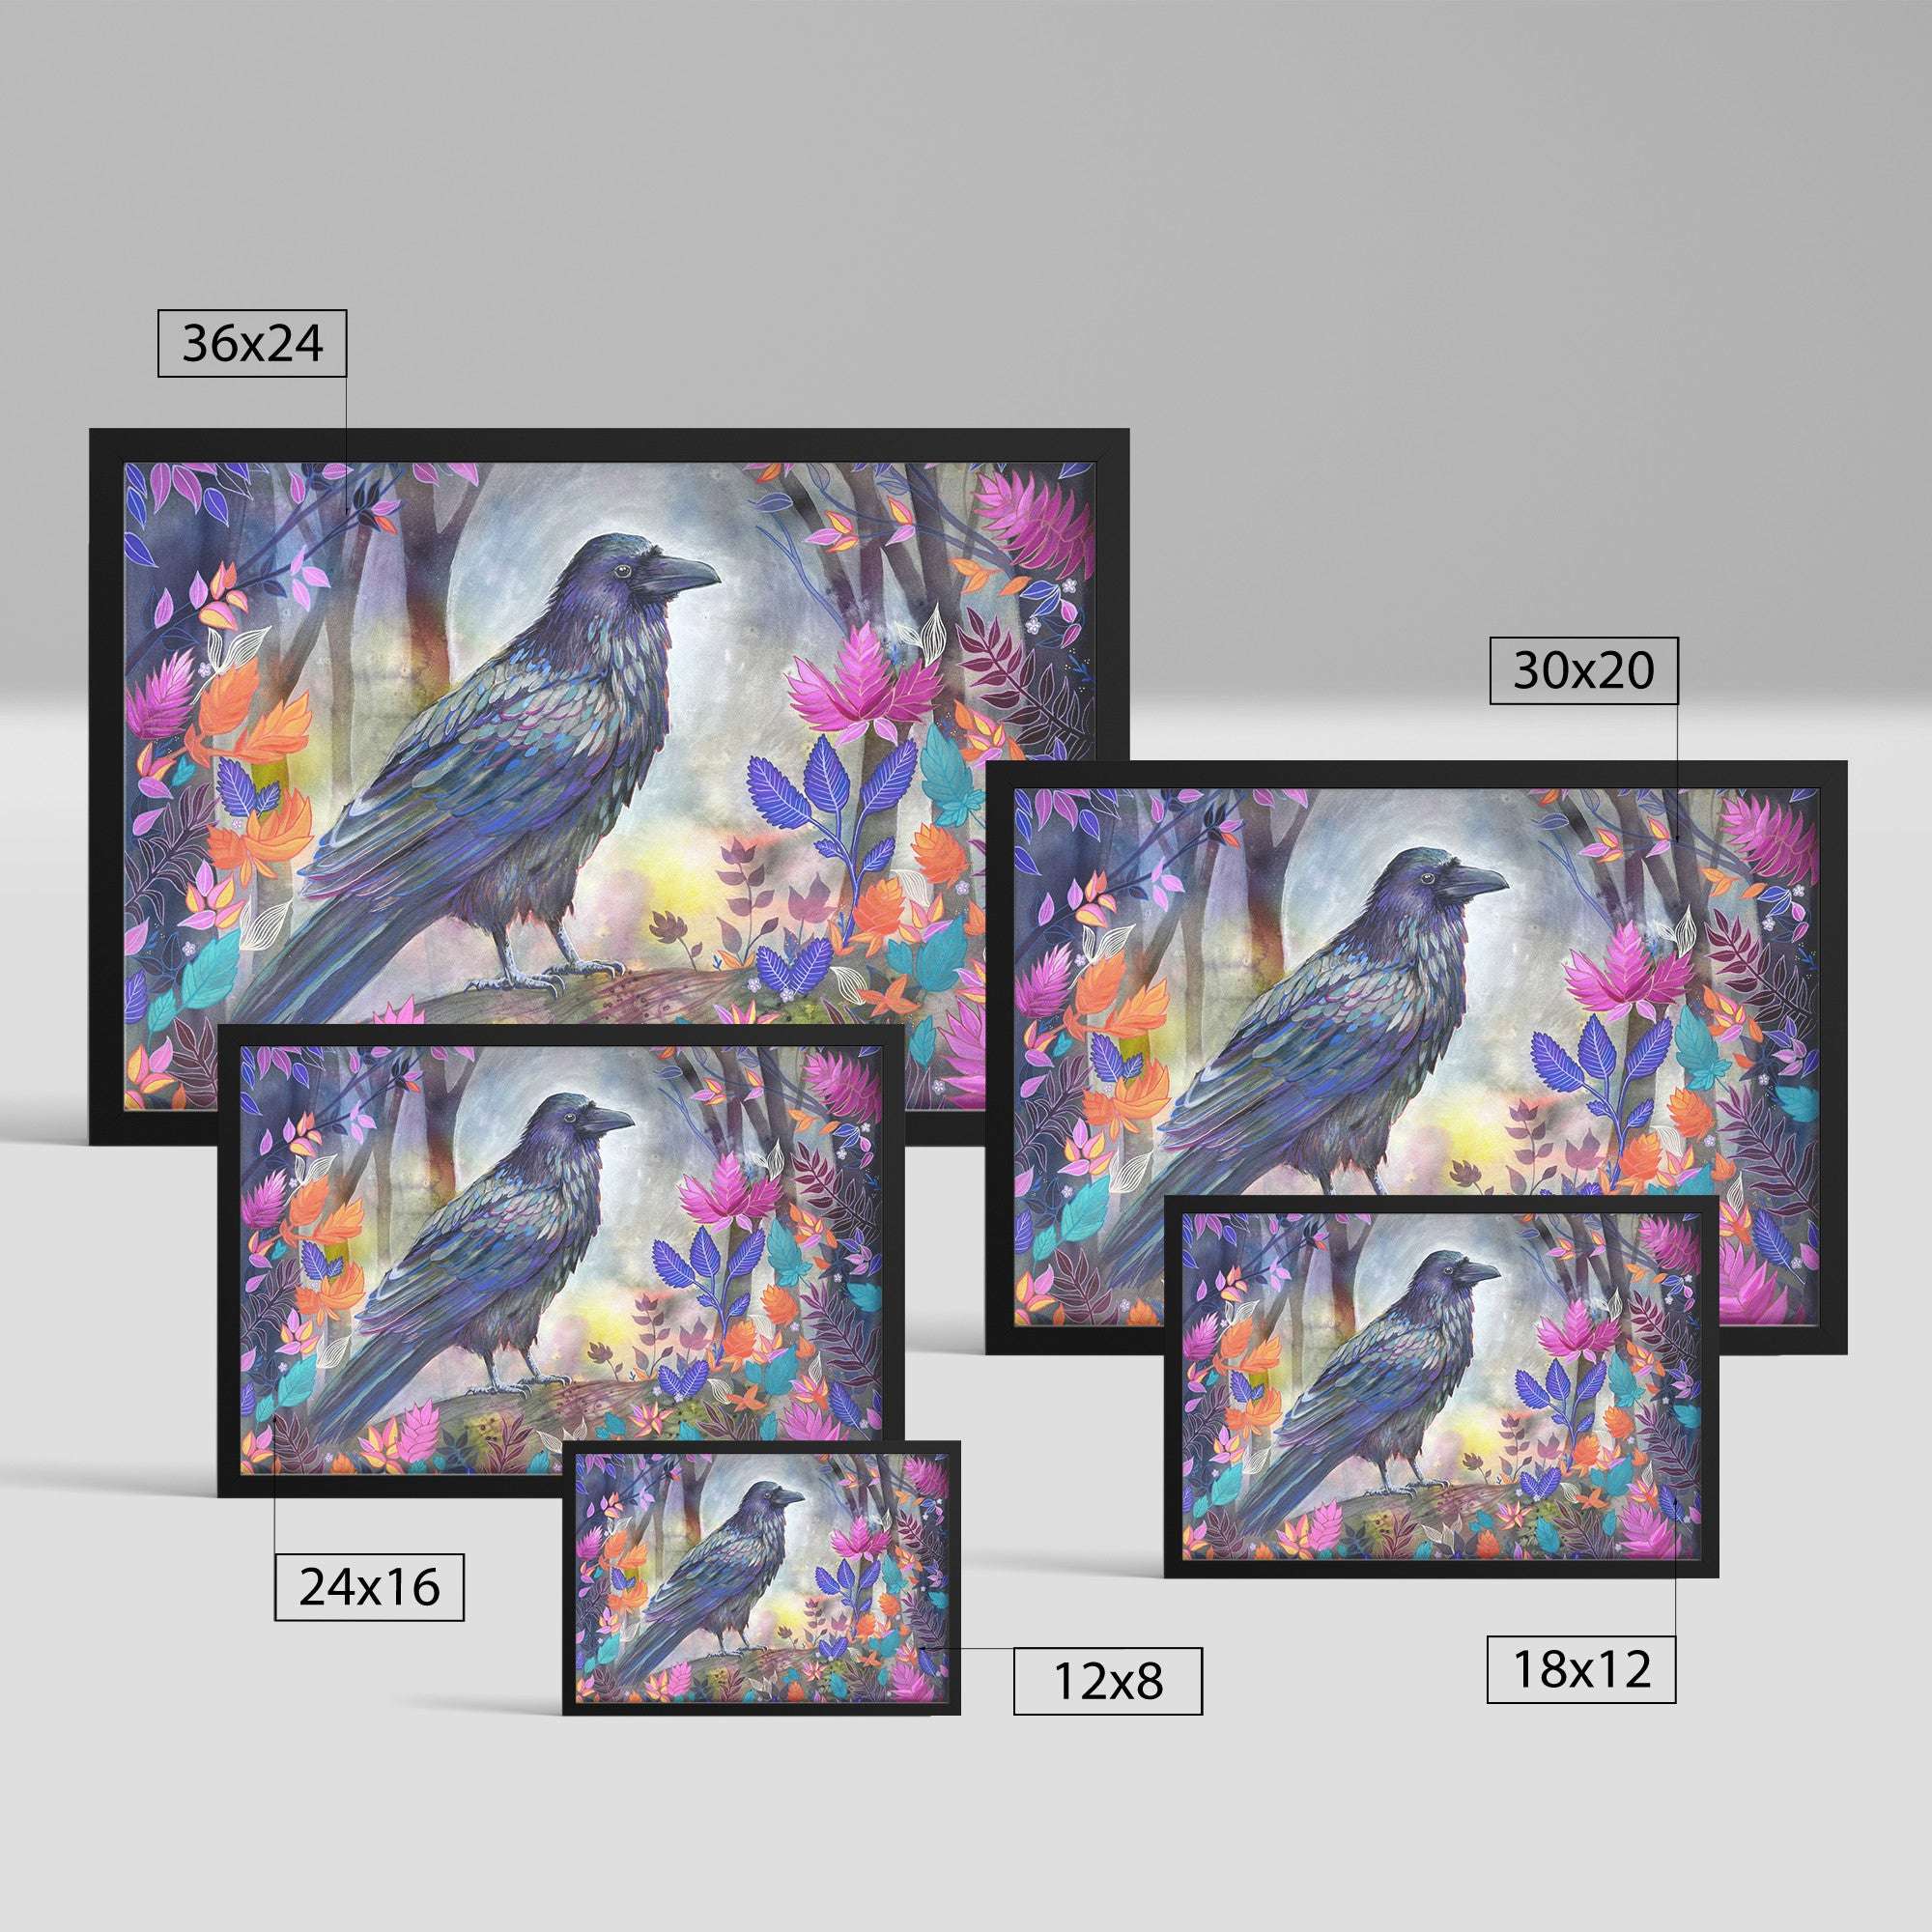 A collection of six Framed Raven Art Prints depicting a crow among vibrant floral and butterfly patterns, in various sizes displayed against a light background.